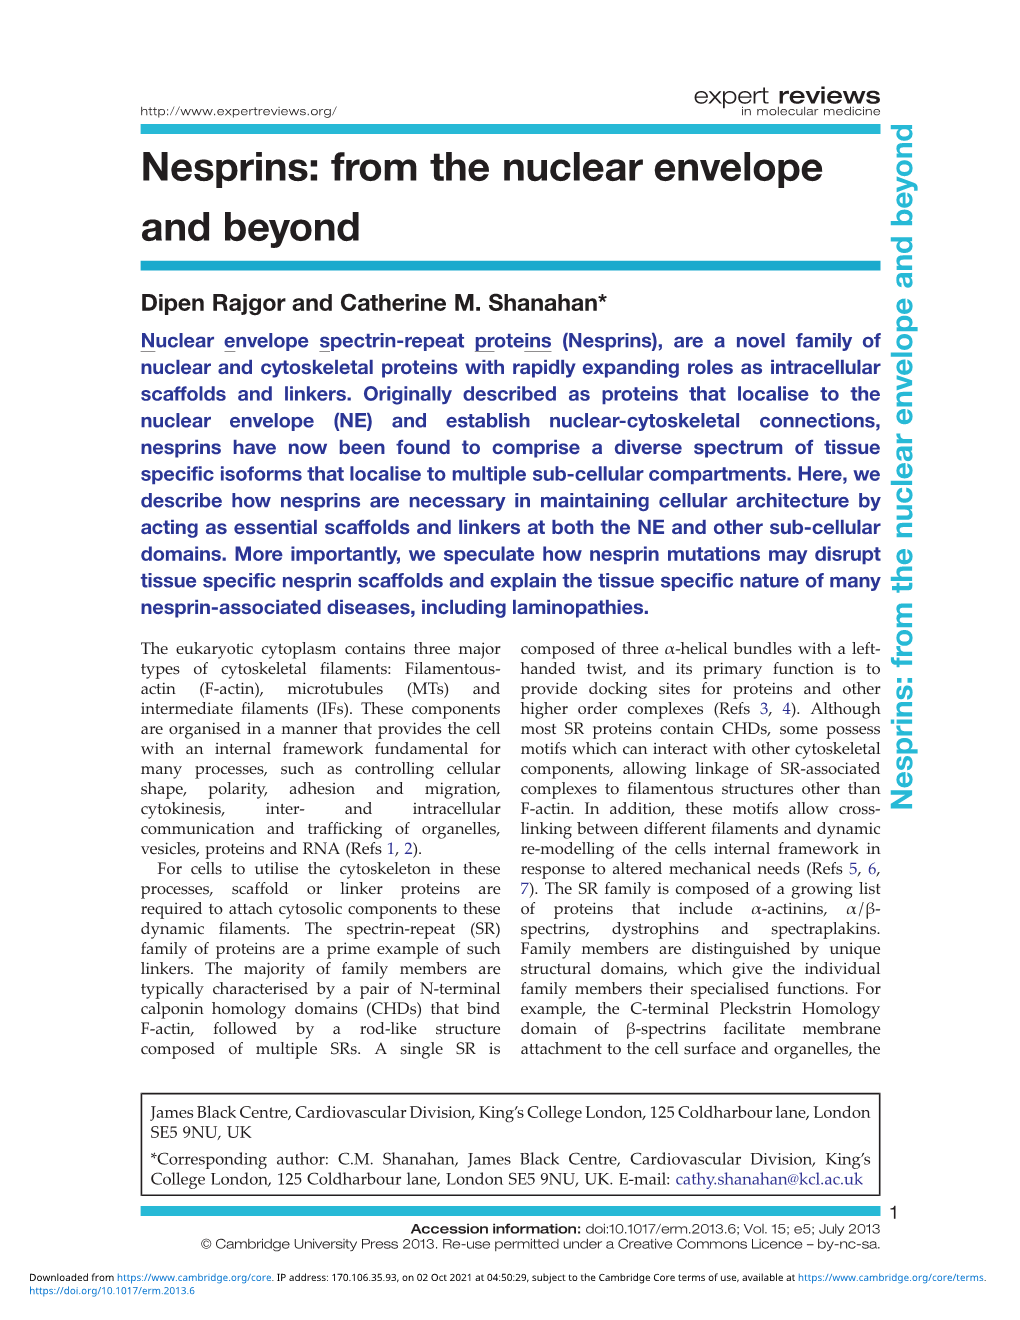 Nesprins: from the Nuclear Envelope and Beyond